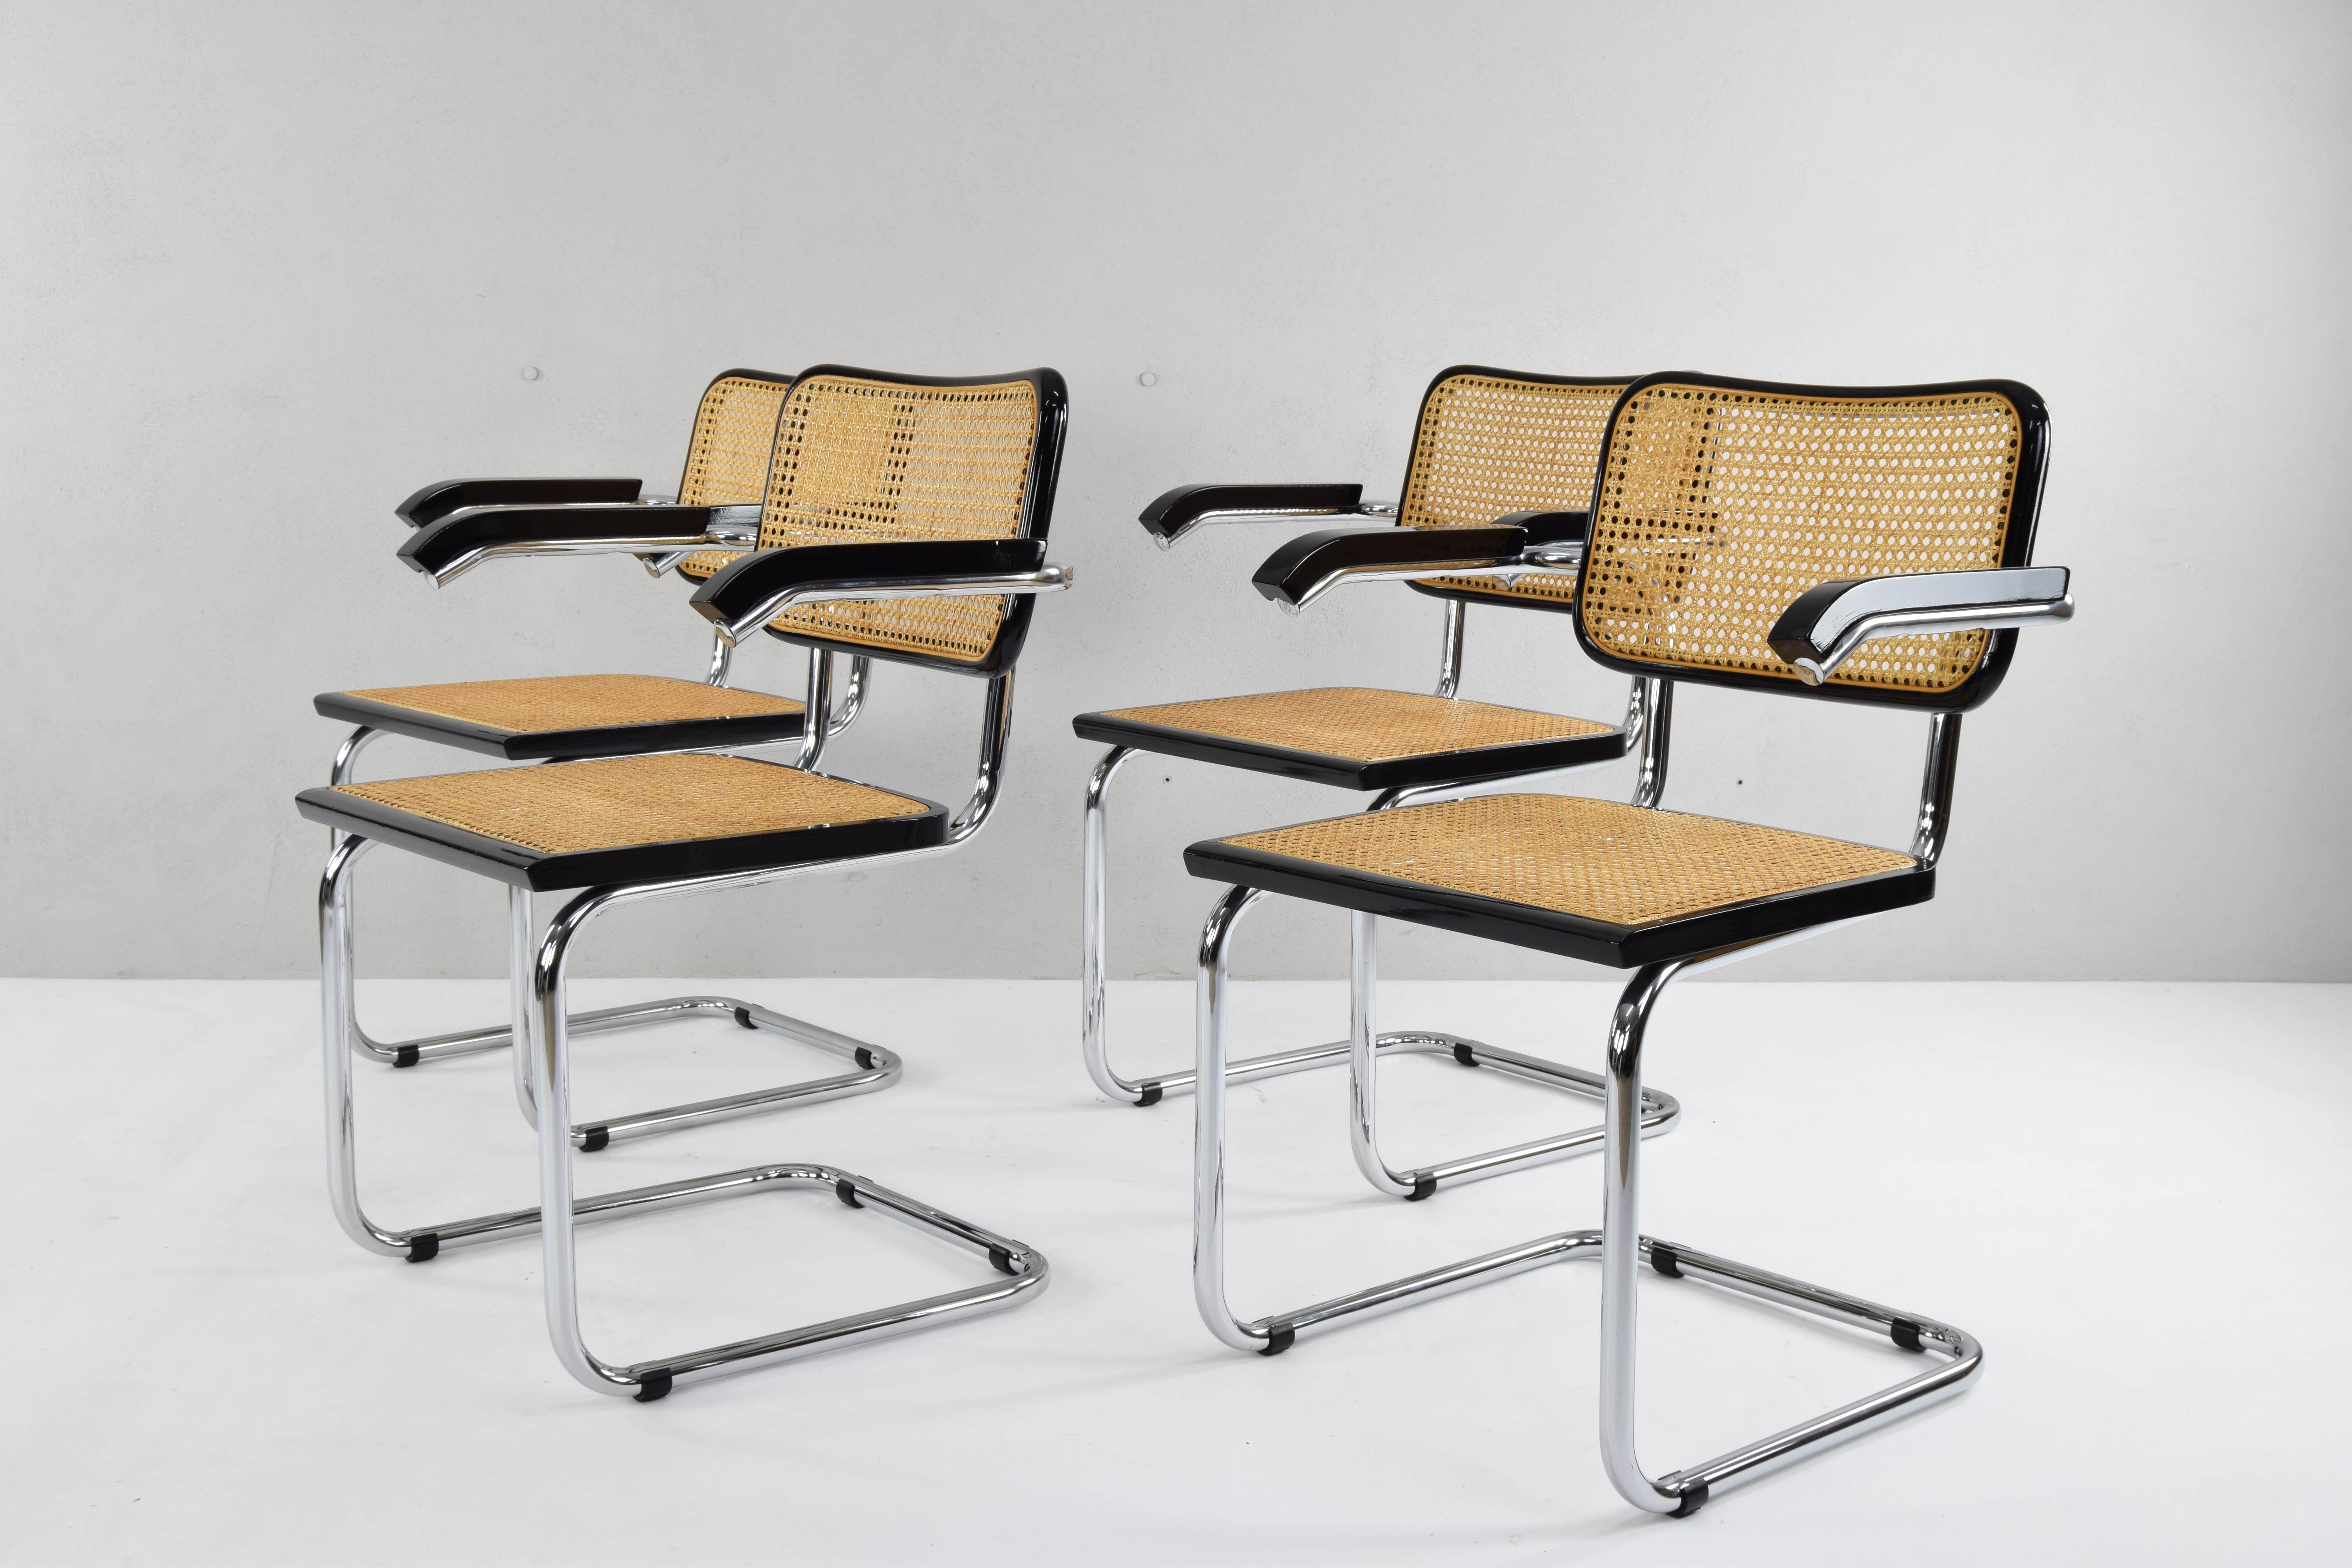 Set of four Cesca chairs model B64, with armrests. Tubular steel chromed structure in very good condition. Beechwood frames lacquered in black and Viennese natural grid. Grids of the four seats have been put new.
Measures:
Total height 83 cm
Seat